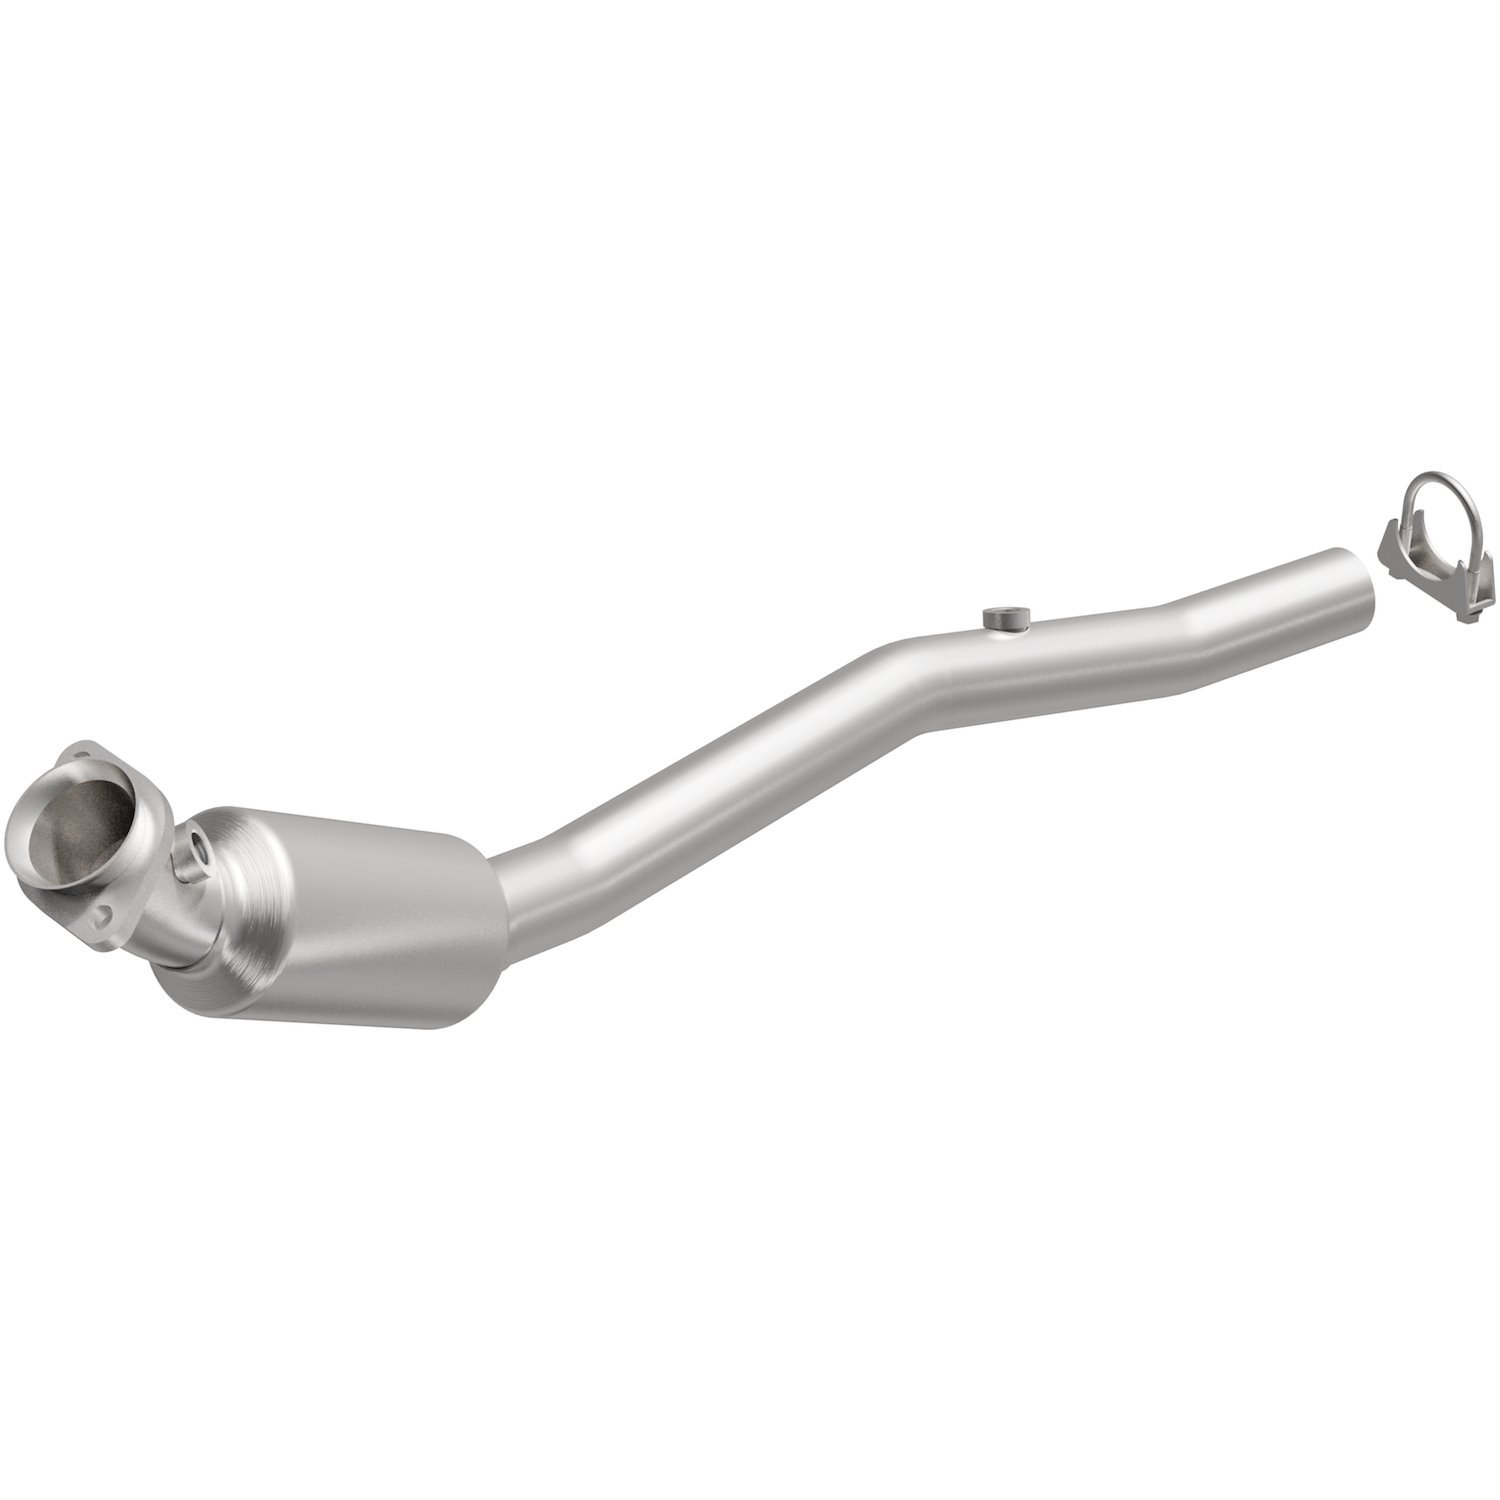 2005 Land Rover Range Rover California Grade CARB Compliant Direct-Fit Catalytic Converter